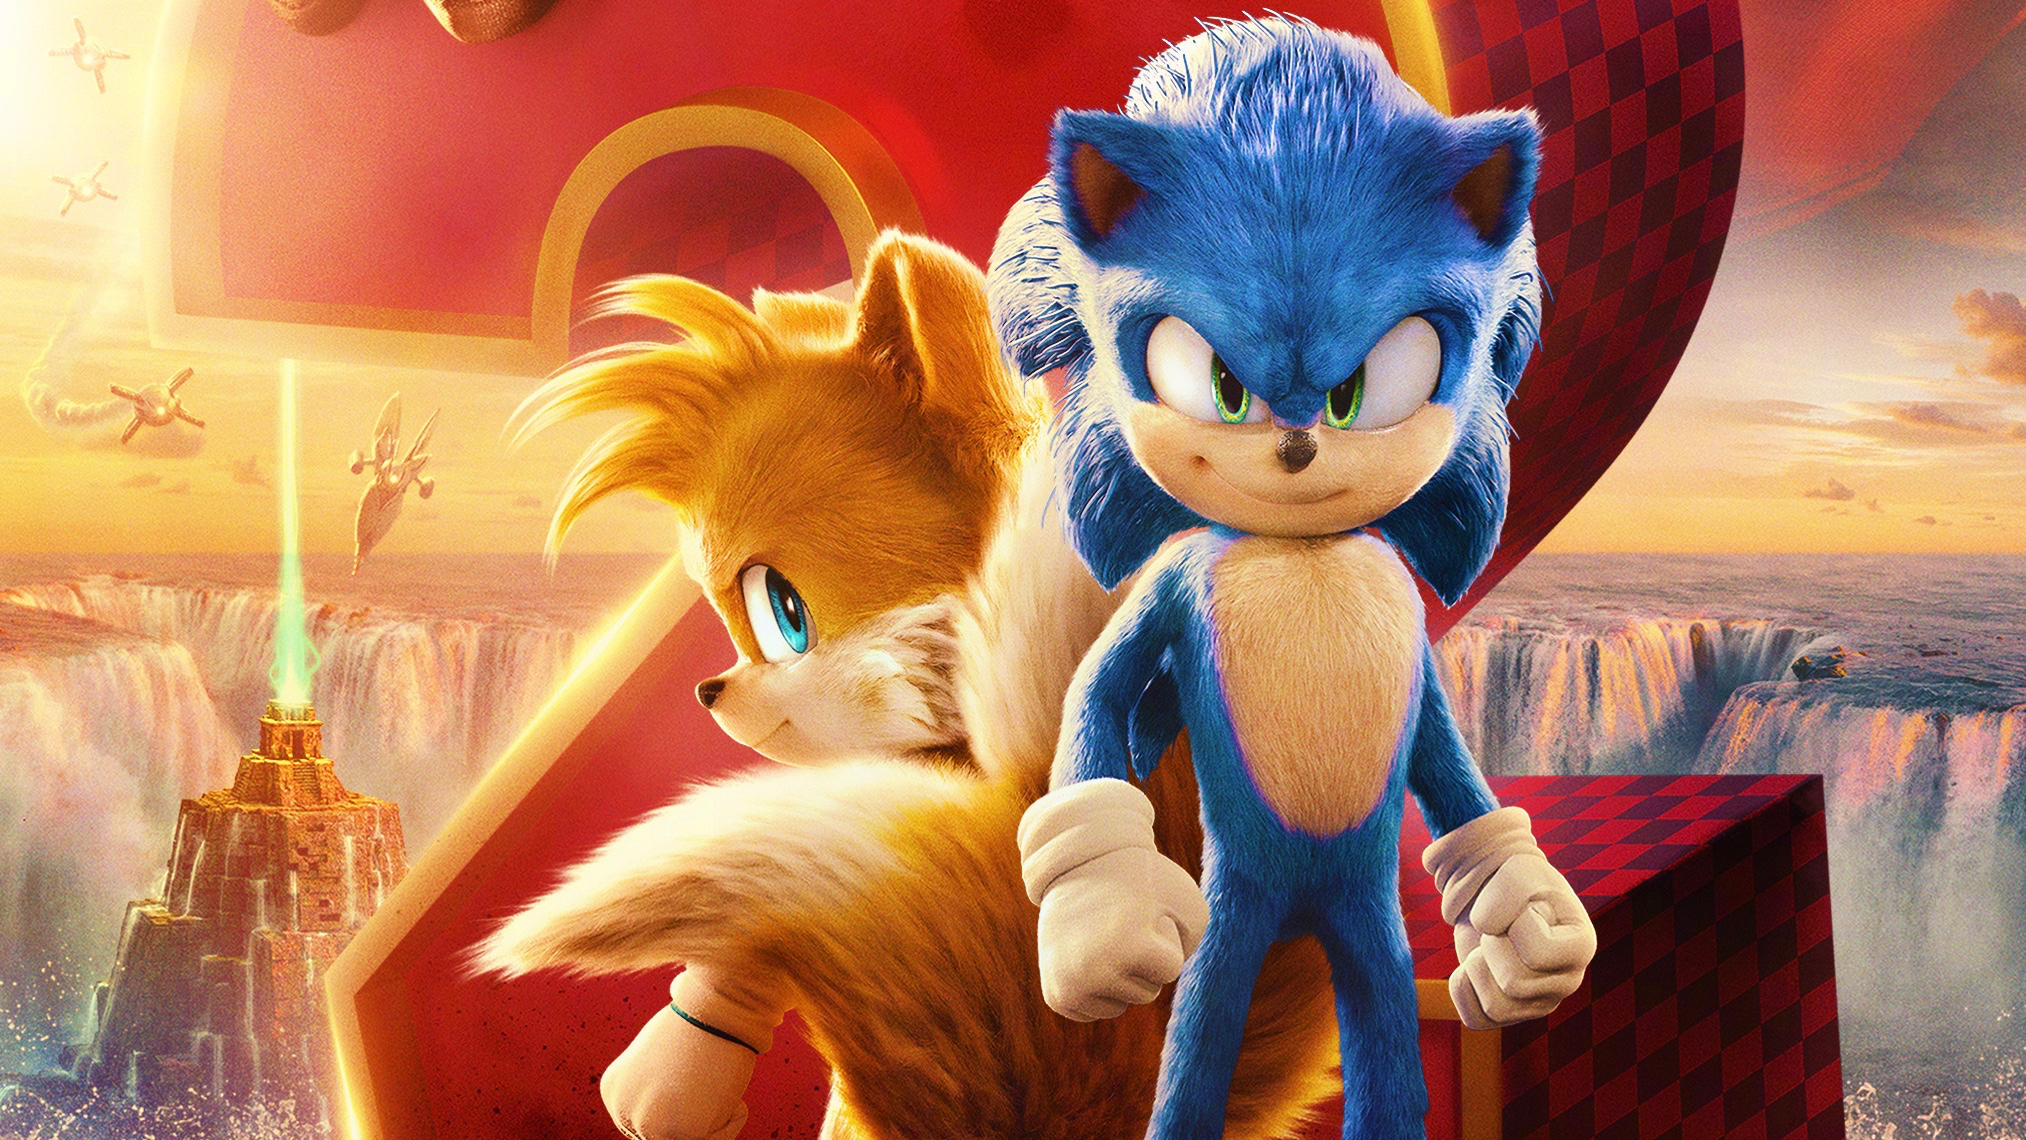 Sonic Film Posters Sonic The Hedgehog Tails Character Sega Movie Characters Movie Screenshots Movie  2026x1140